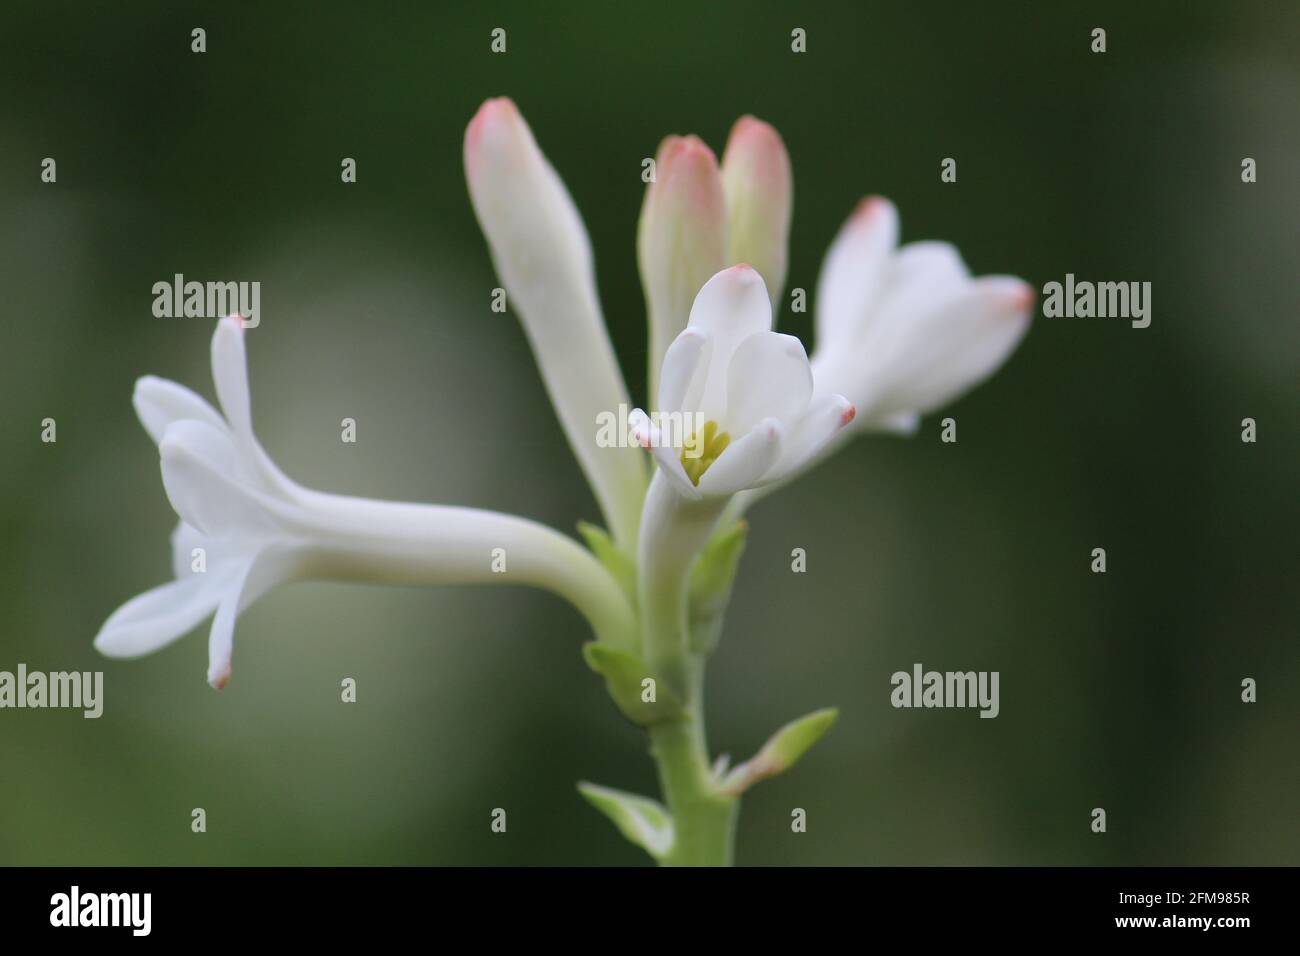 Selective focus shot of a white flower of tuberose plant in a garden Stock Photo